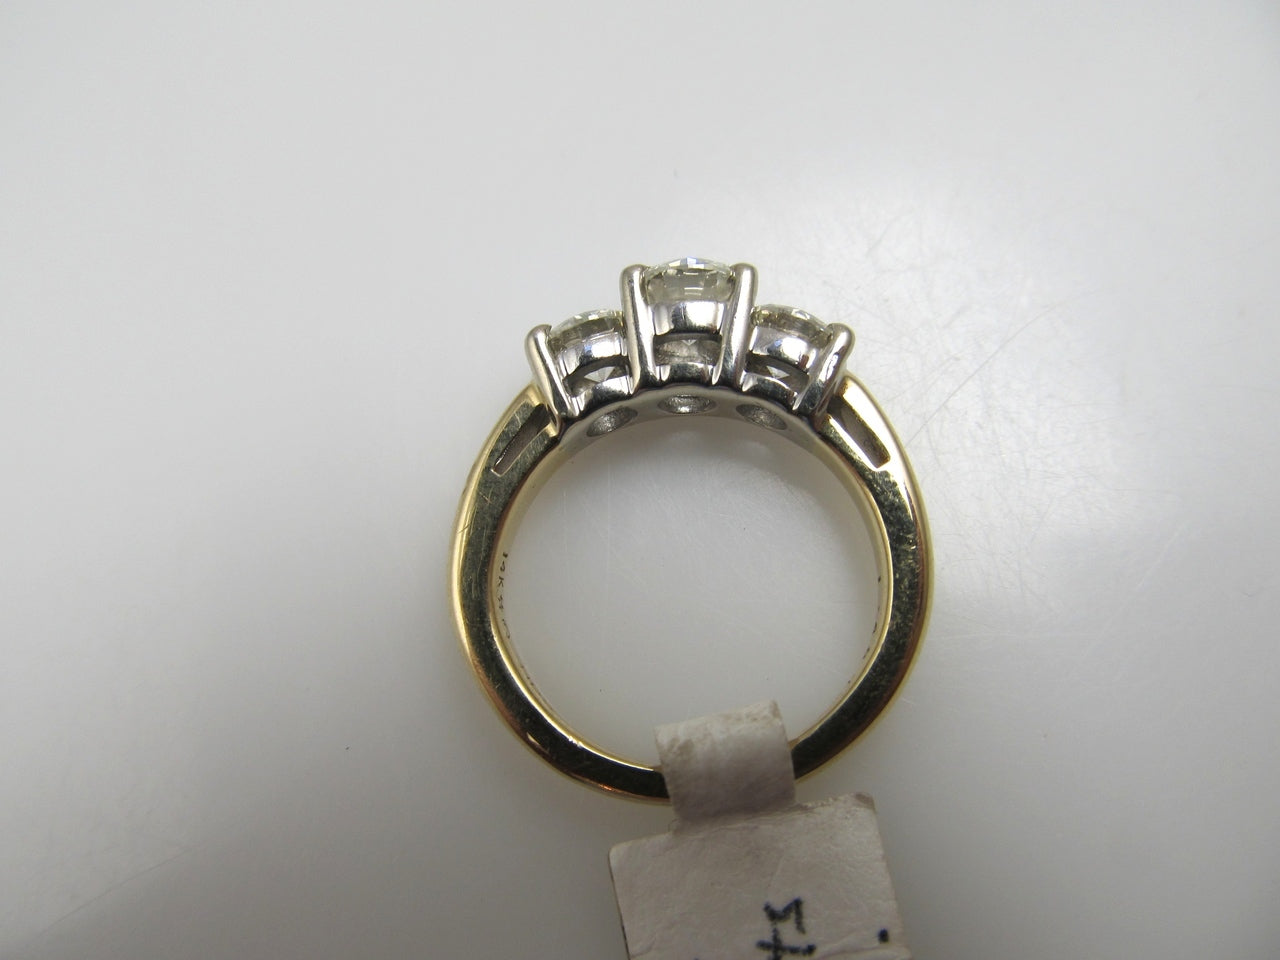 14k ring with 3 diamonds totaling 1.46cts